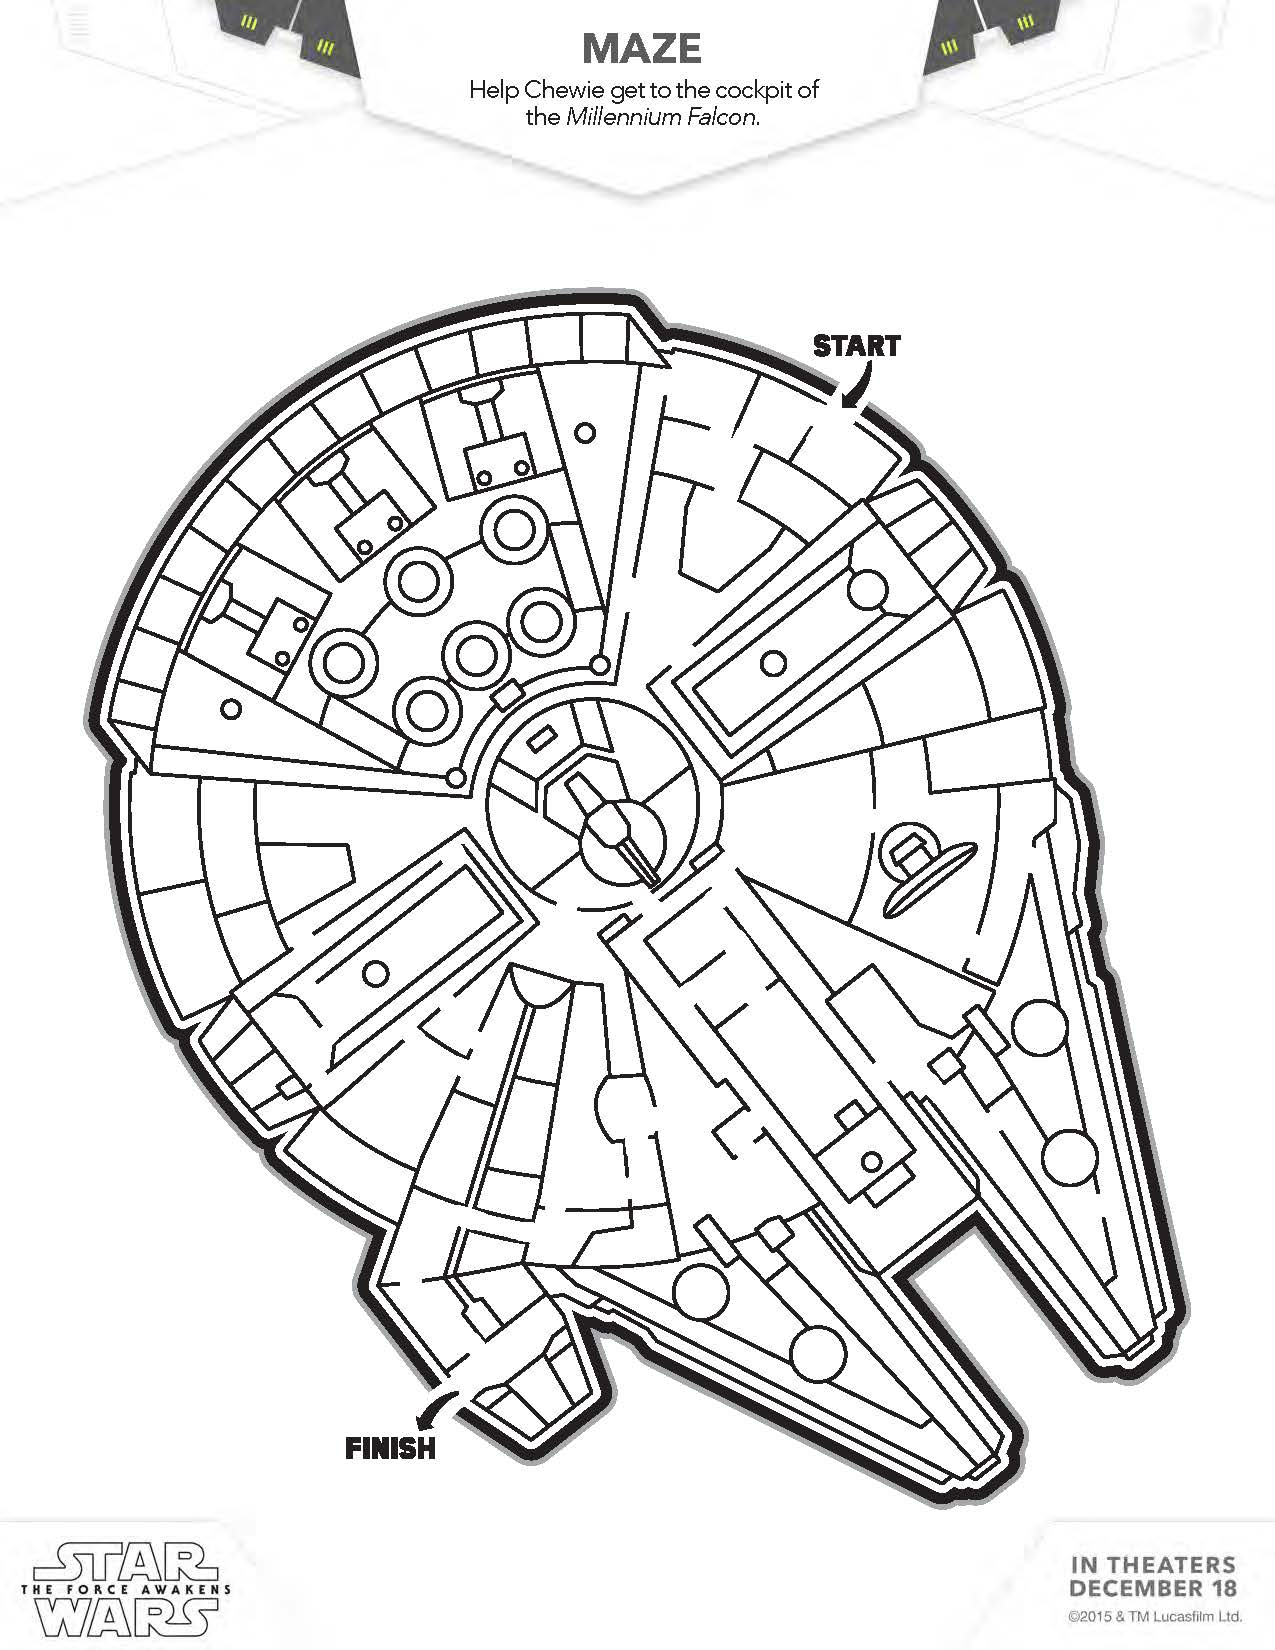 Star Wars Coloring Pages, The Force Awakens Coloring Pages destiné Falcon 9 Dessin